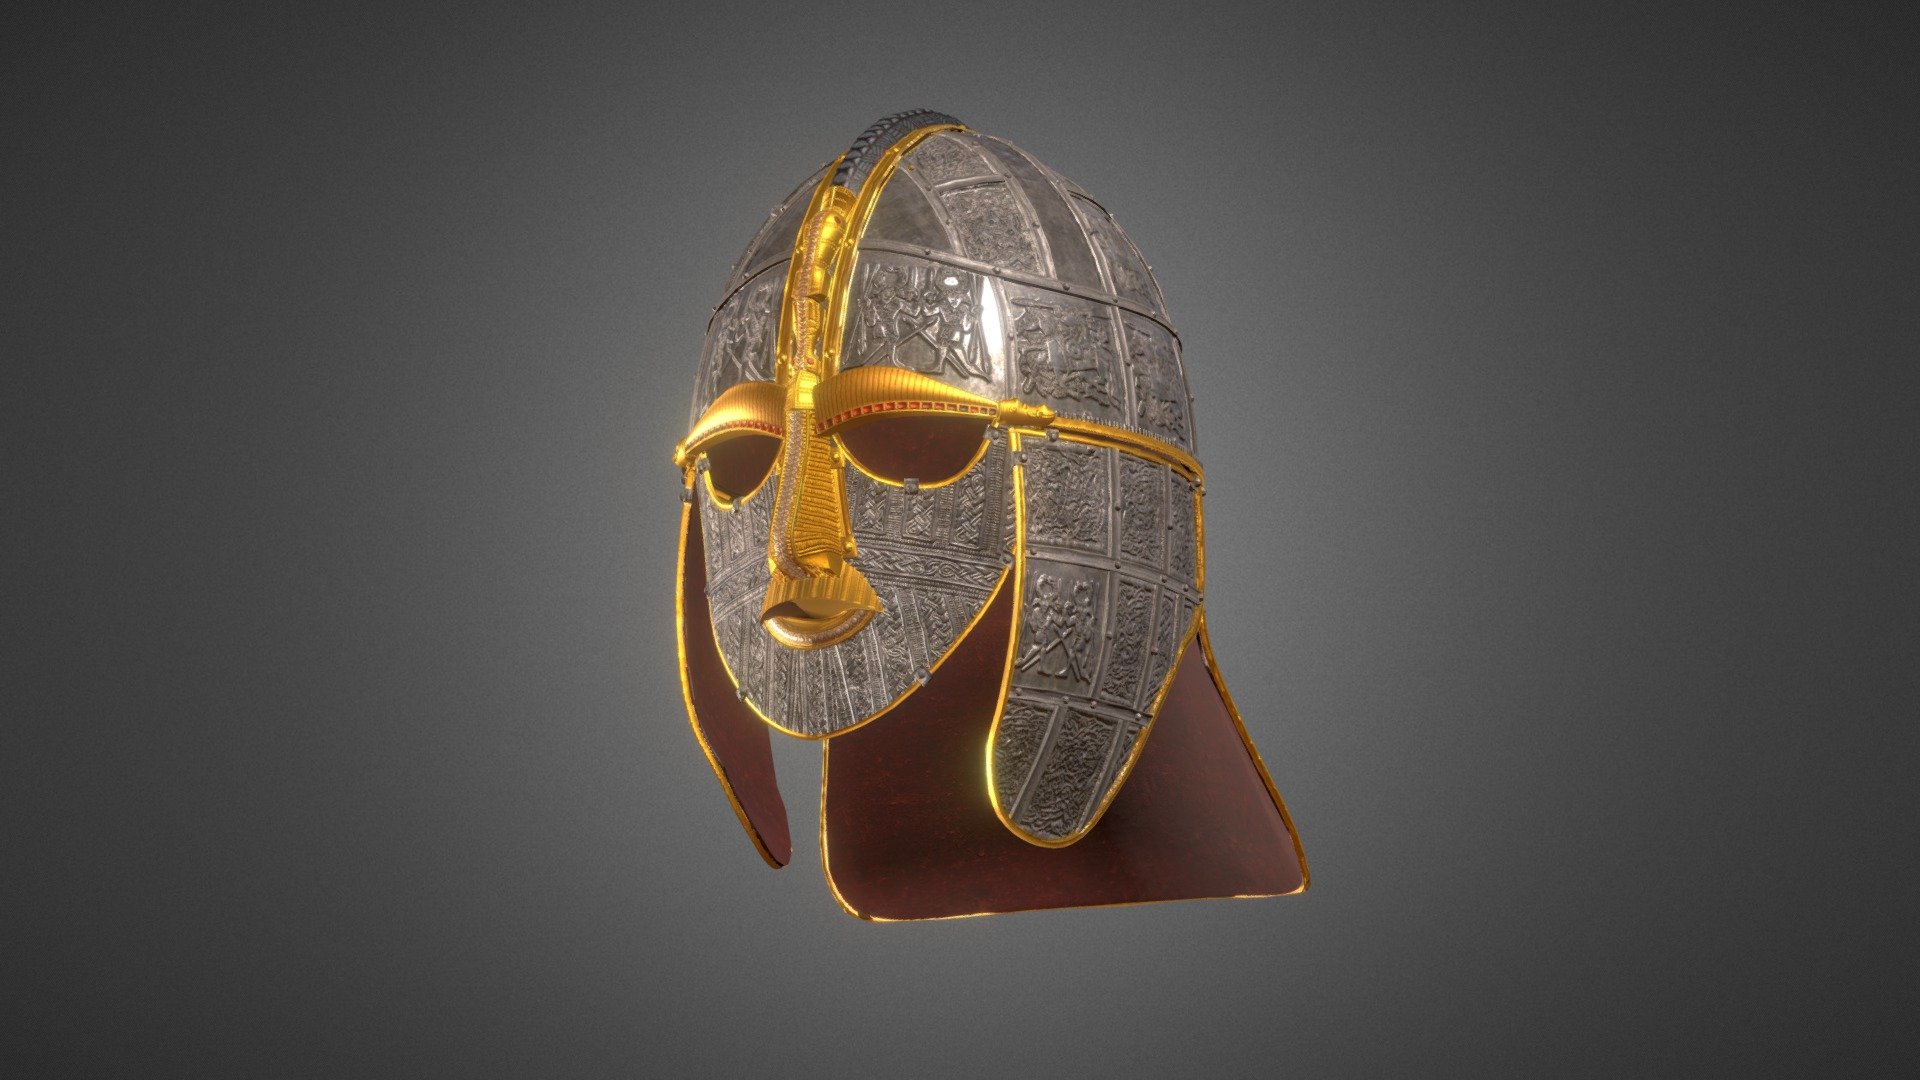 new version for sale here - Sutton Hoo Helmet - 3D model by 100drips (@thecali) 3d model